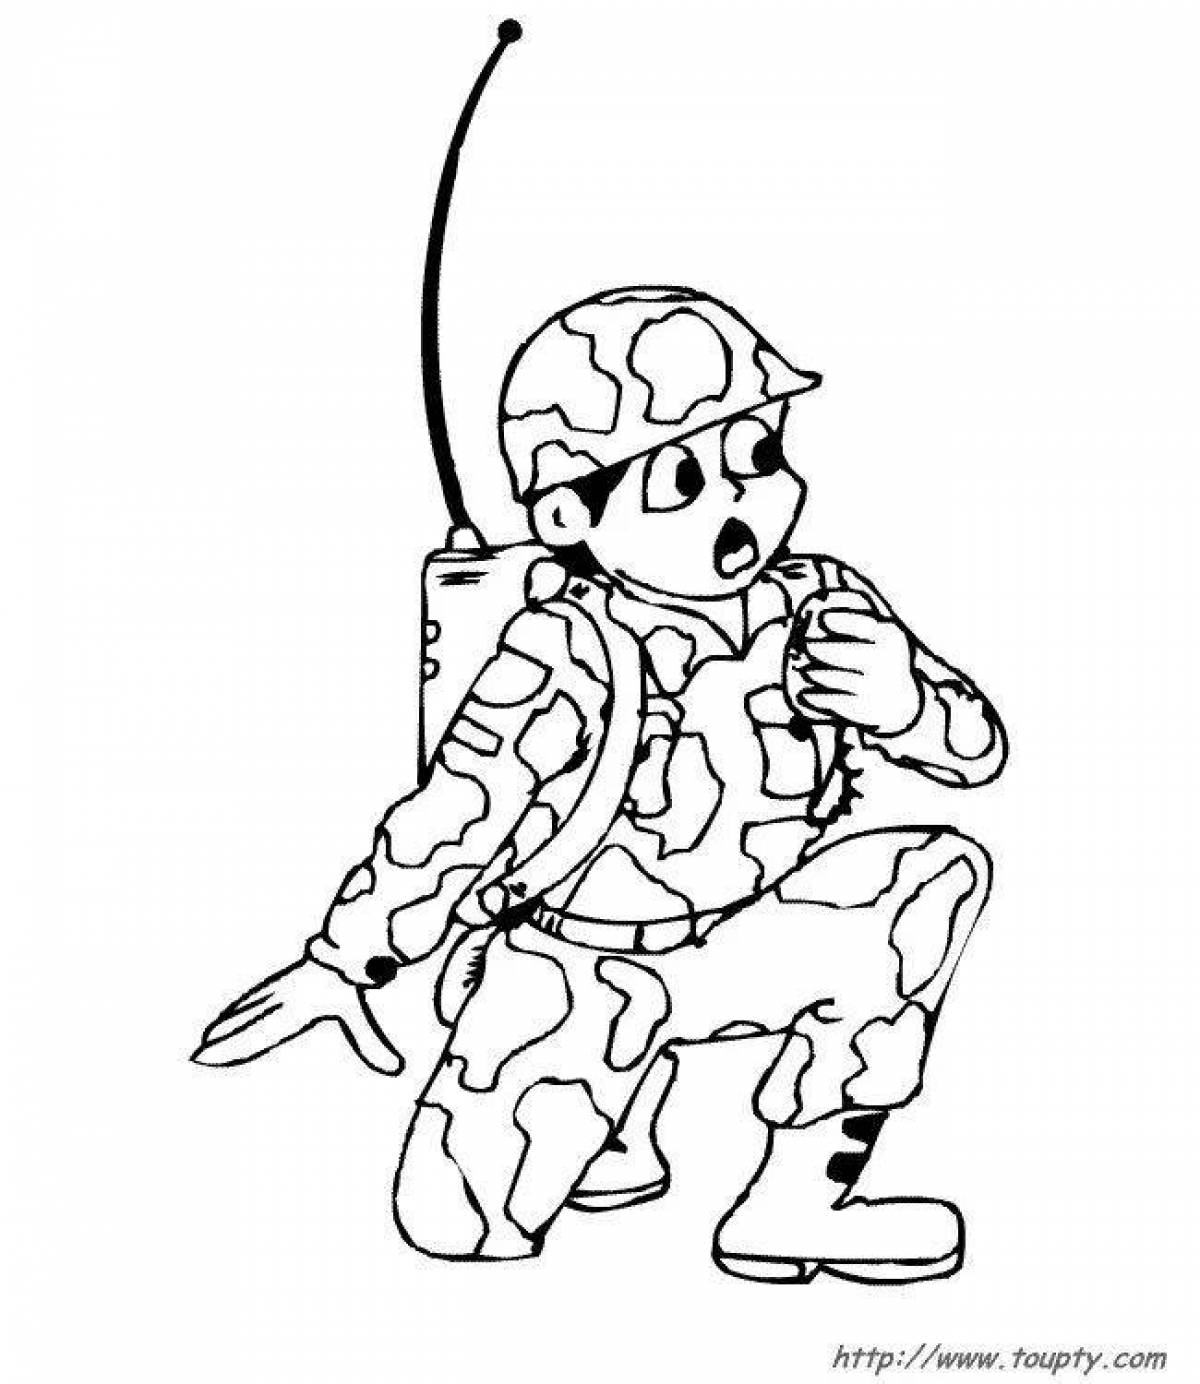 Amazing soldier coloring page February 23